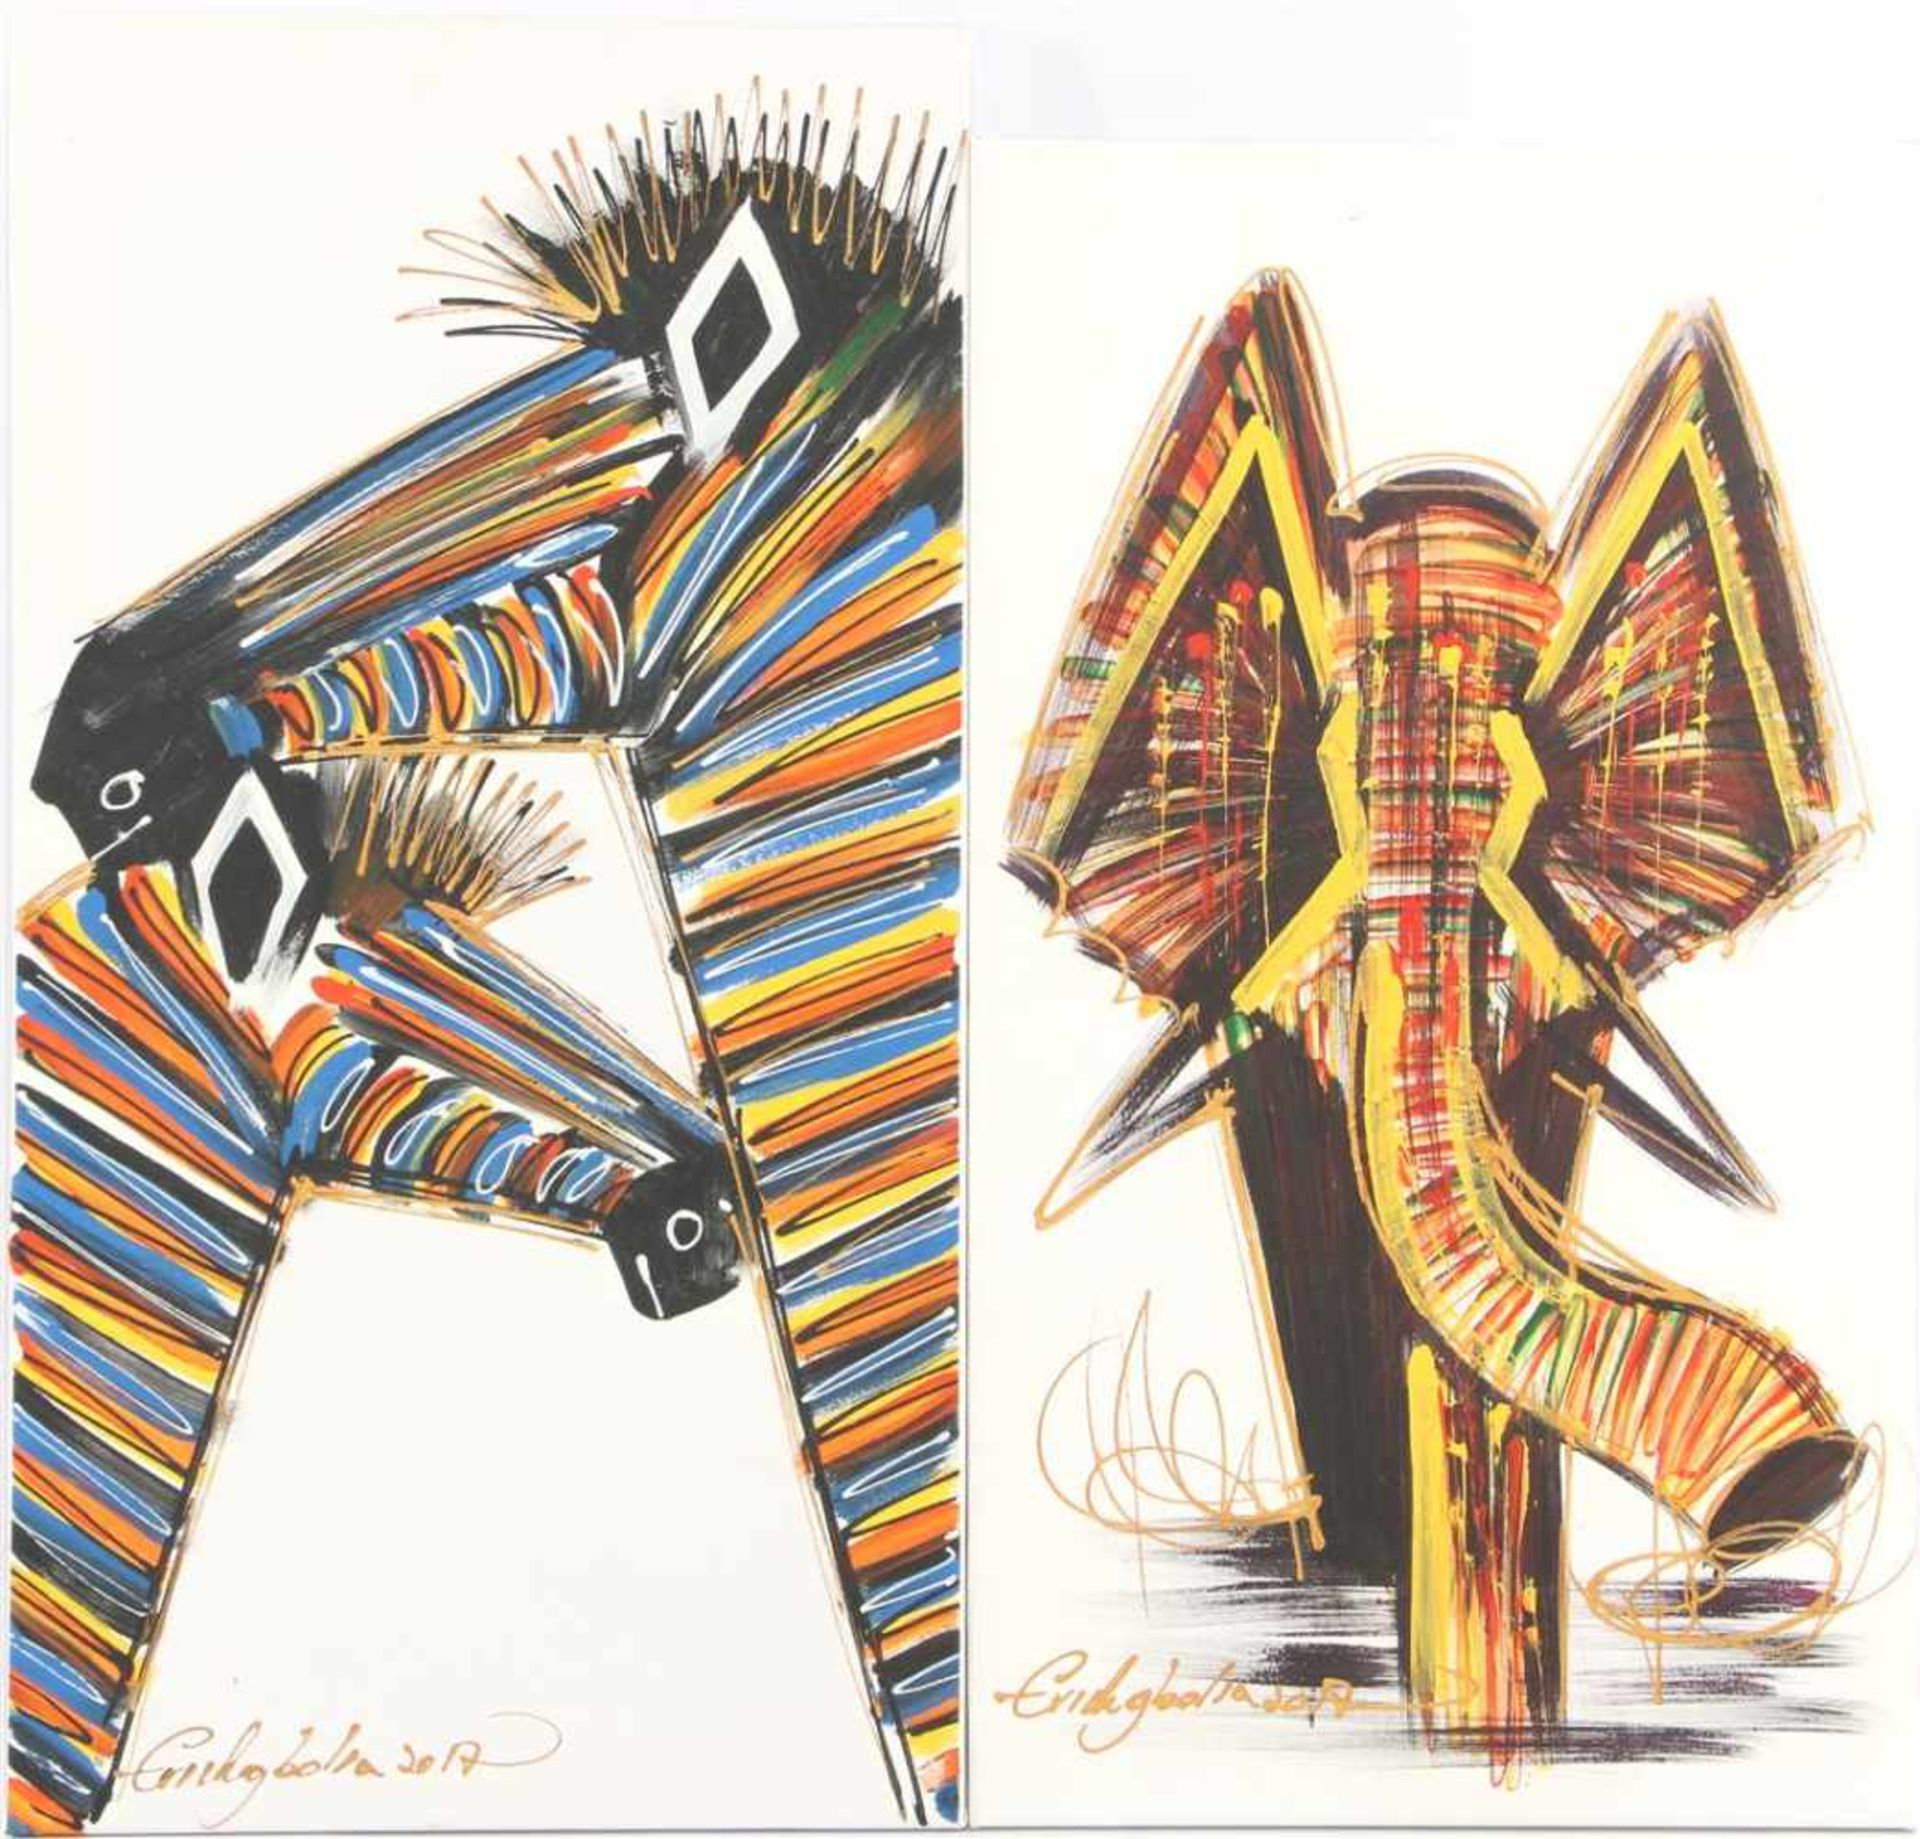 2x unclearly signed, elephant and 2 zebras, 93x52 cm and 99x51.5 cm